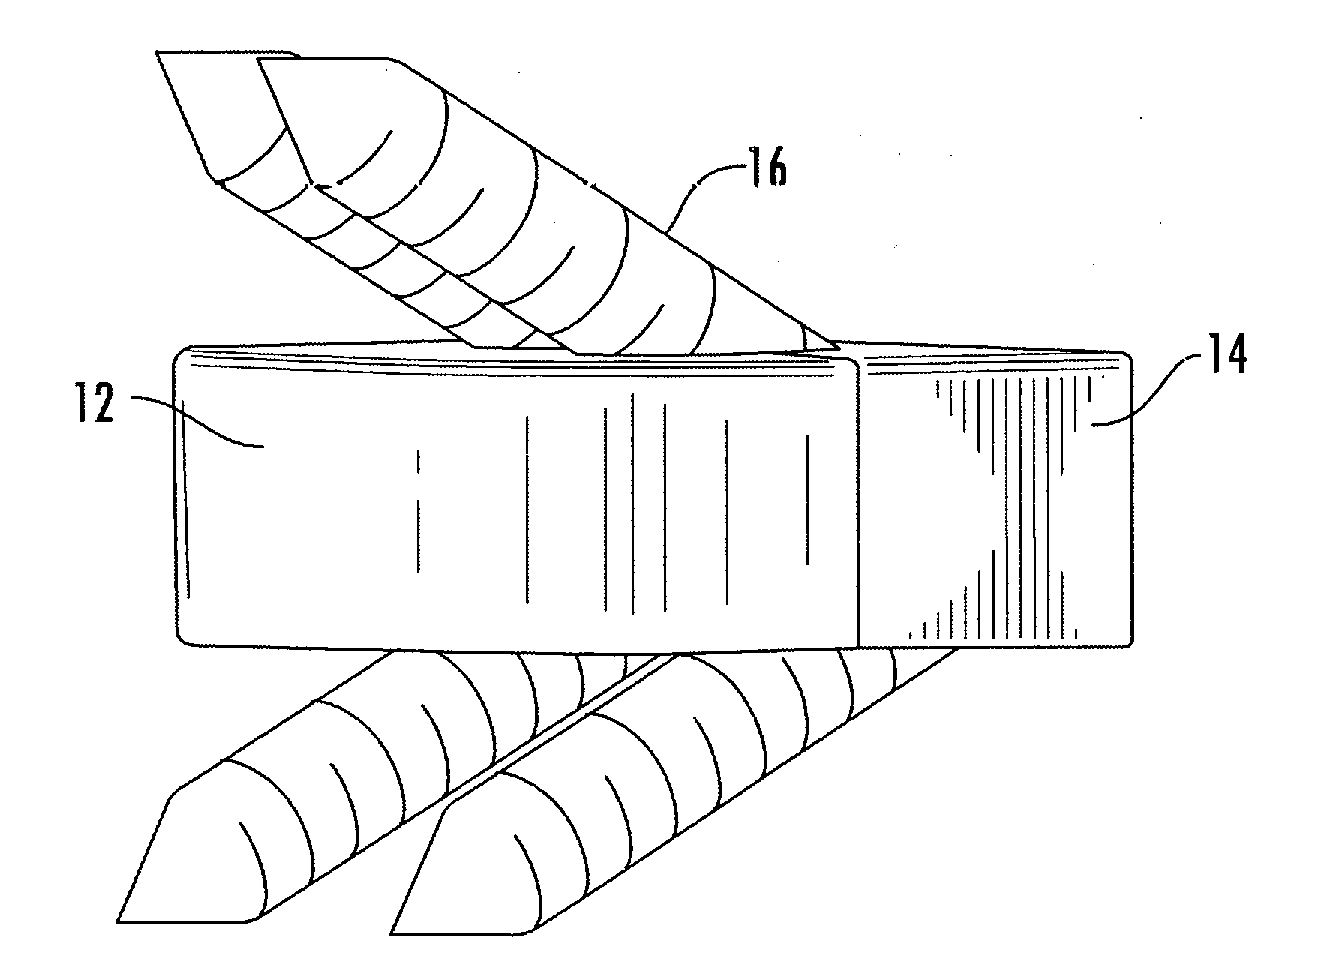 Interbody fusion system with intervertebral implant retention assembly